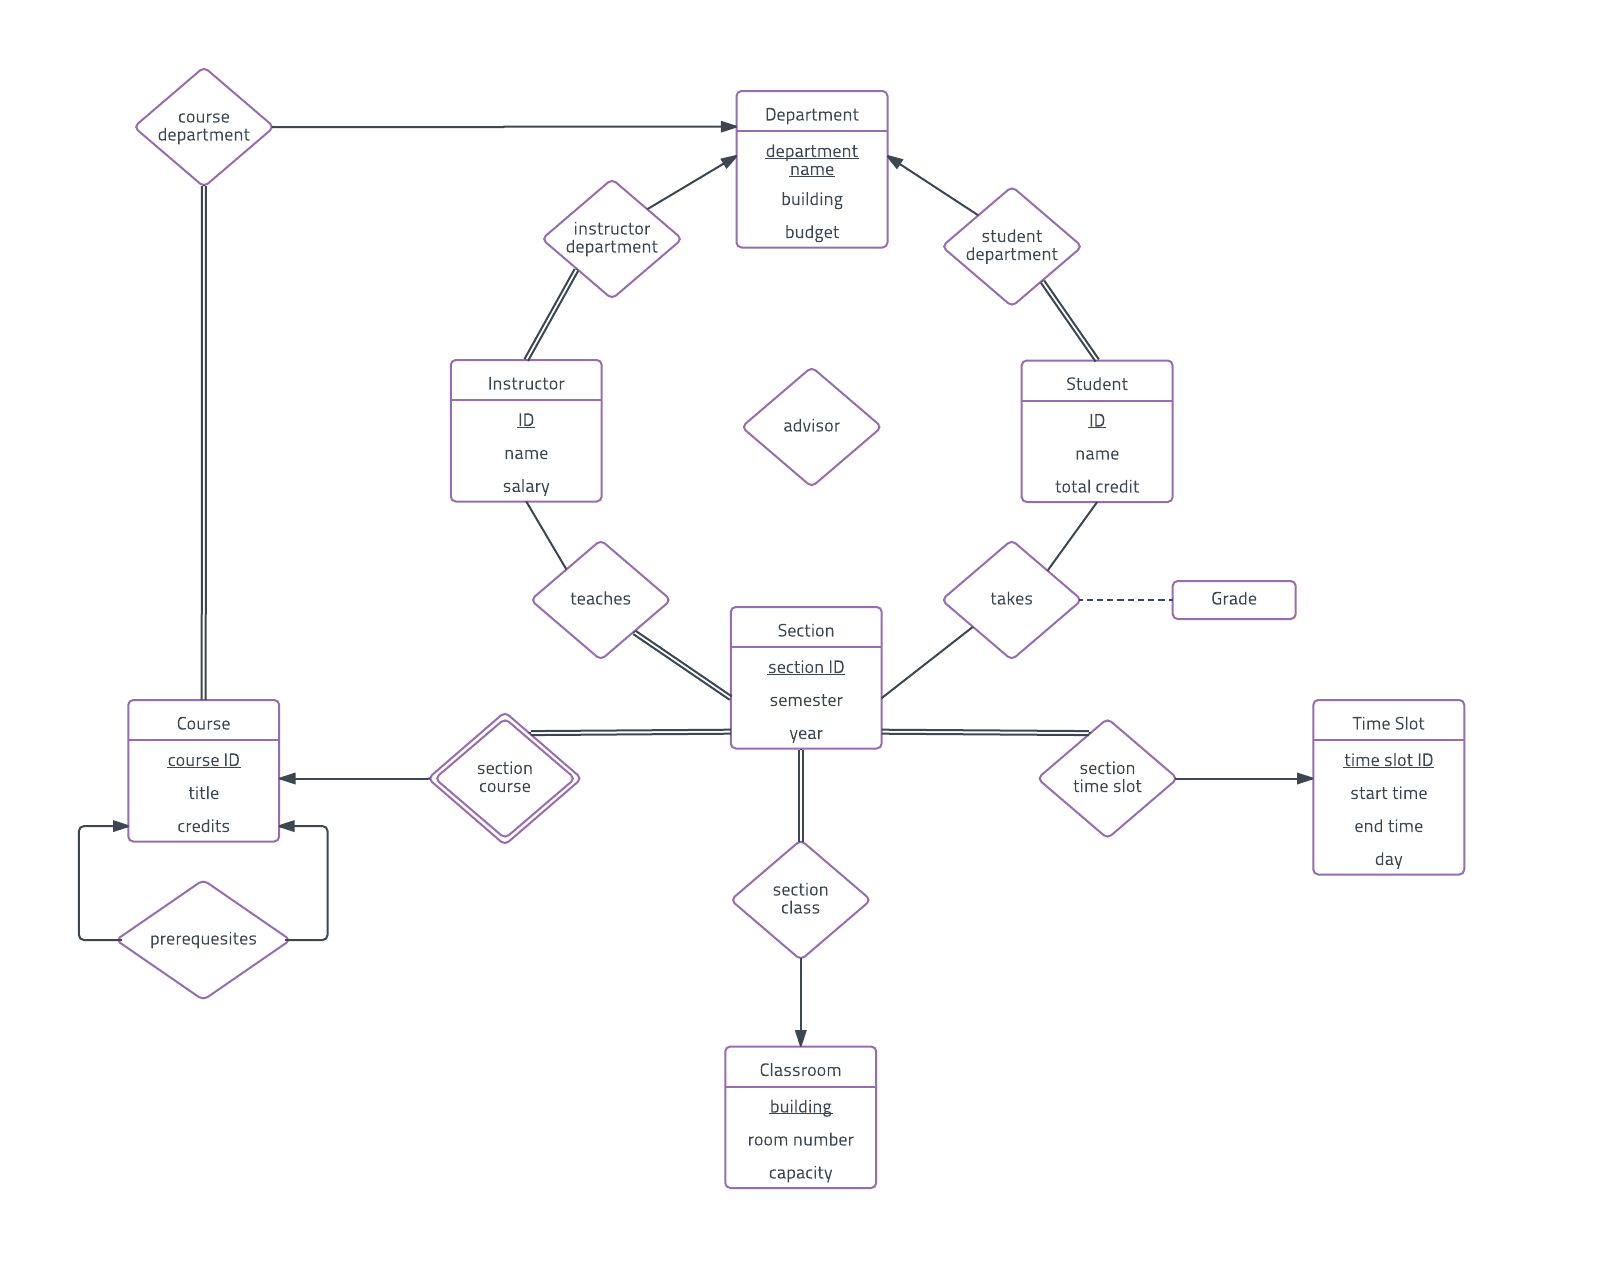 Er Diagram Examples And Templates | Lucidchart in Enhanced Er Diagram Examples